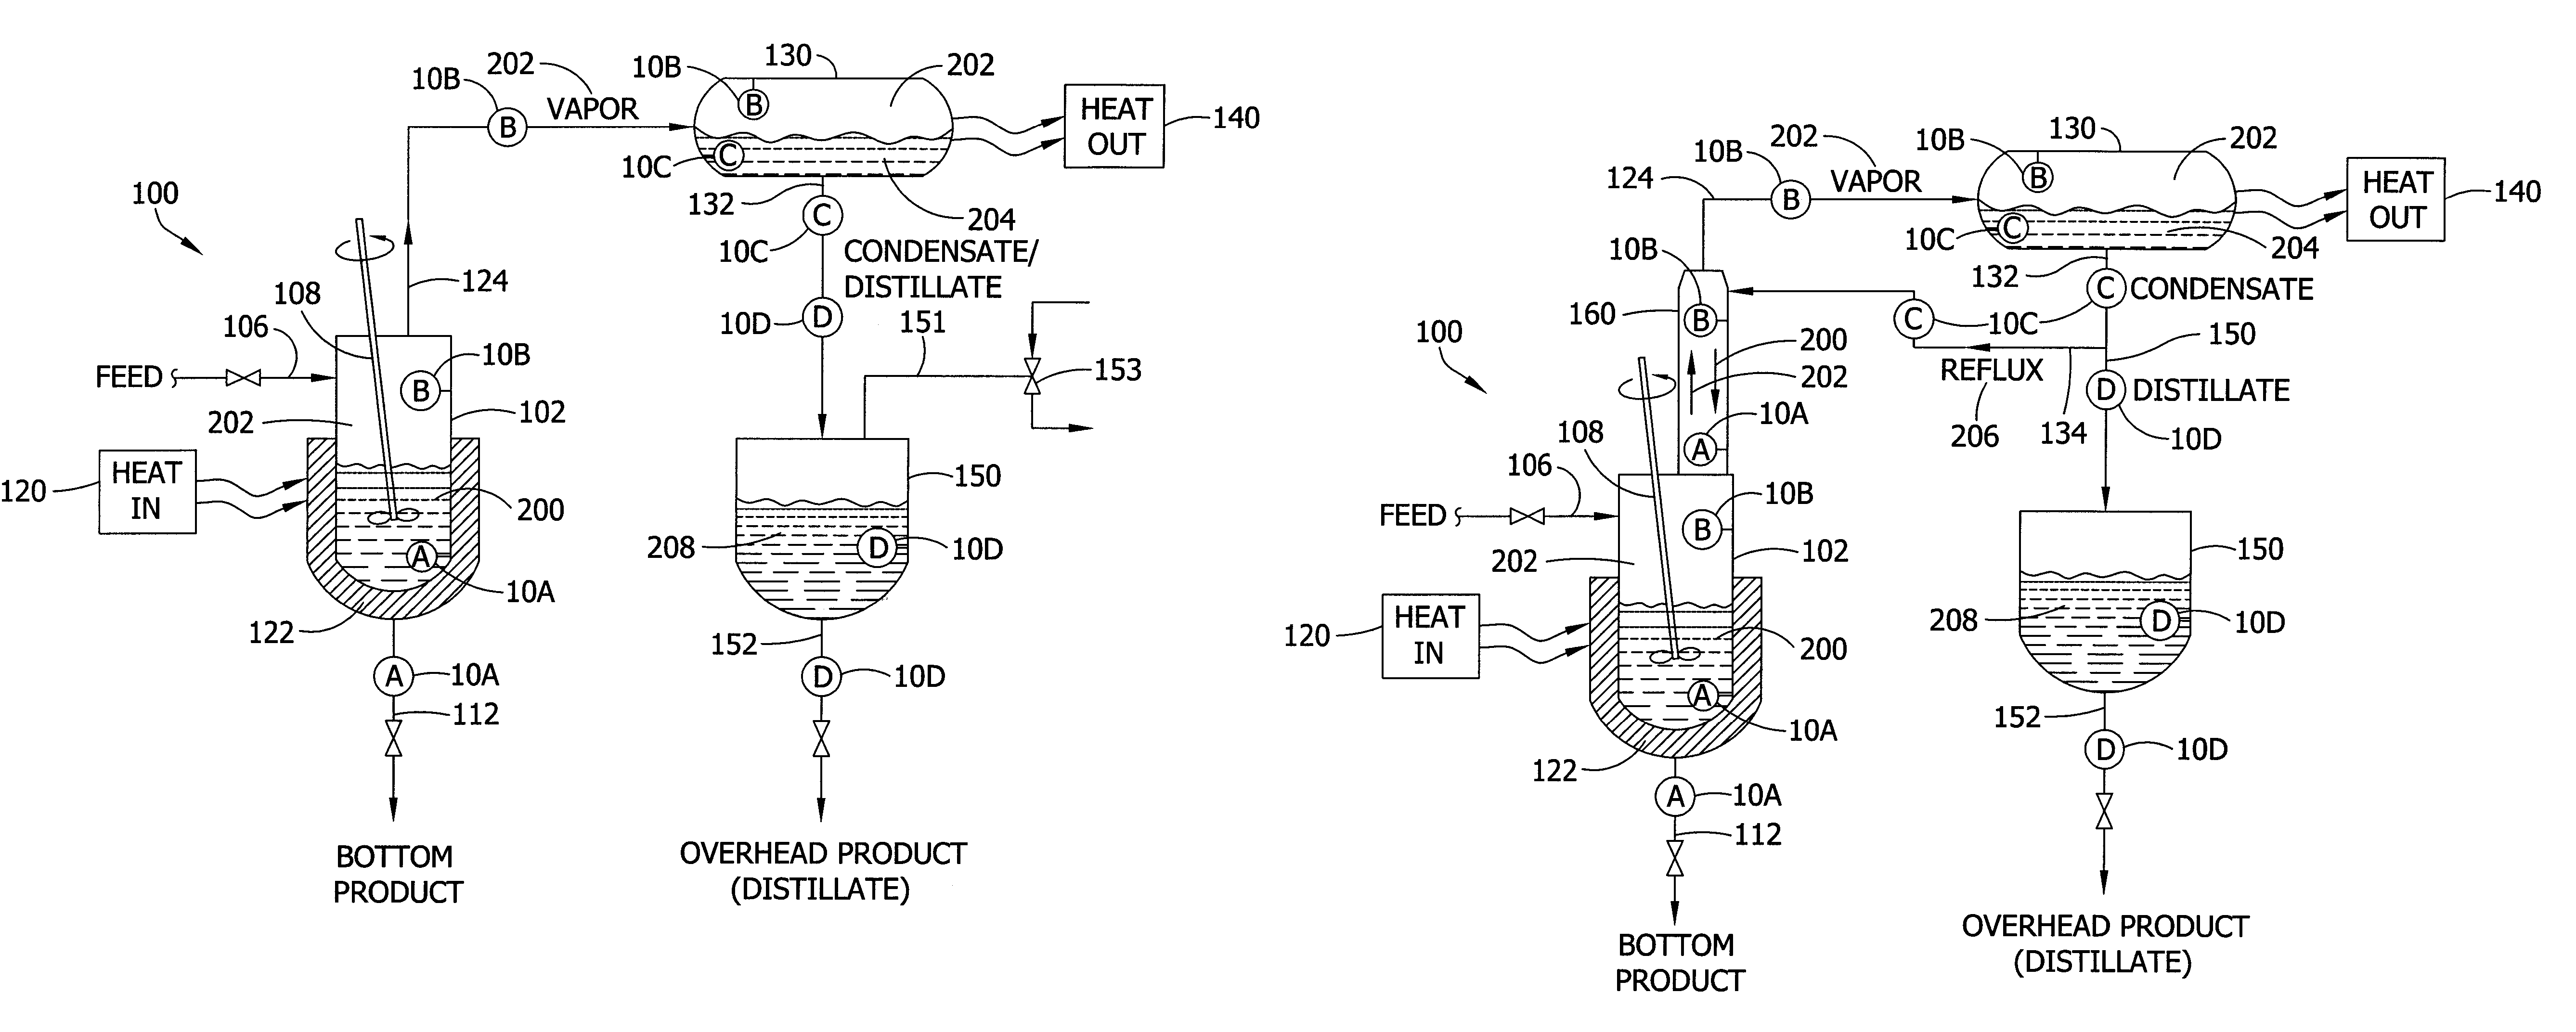 Systems for monitoring and controlling unit operations that include distillation